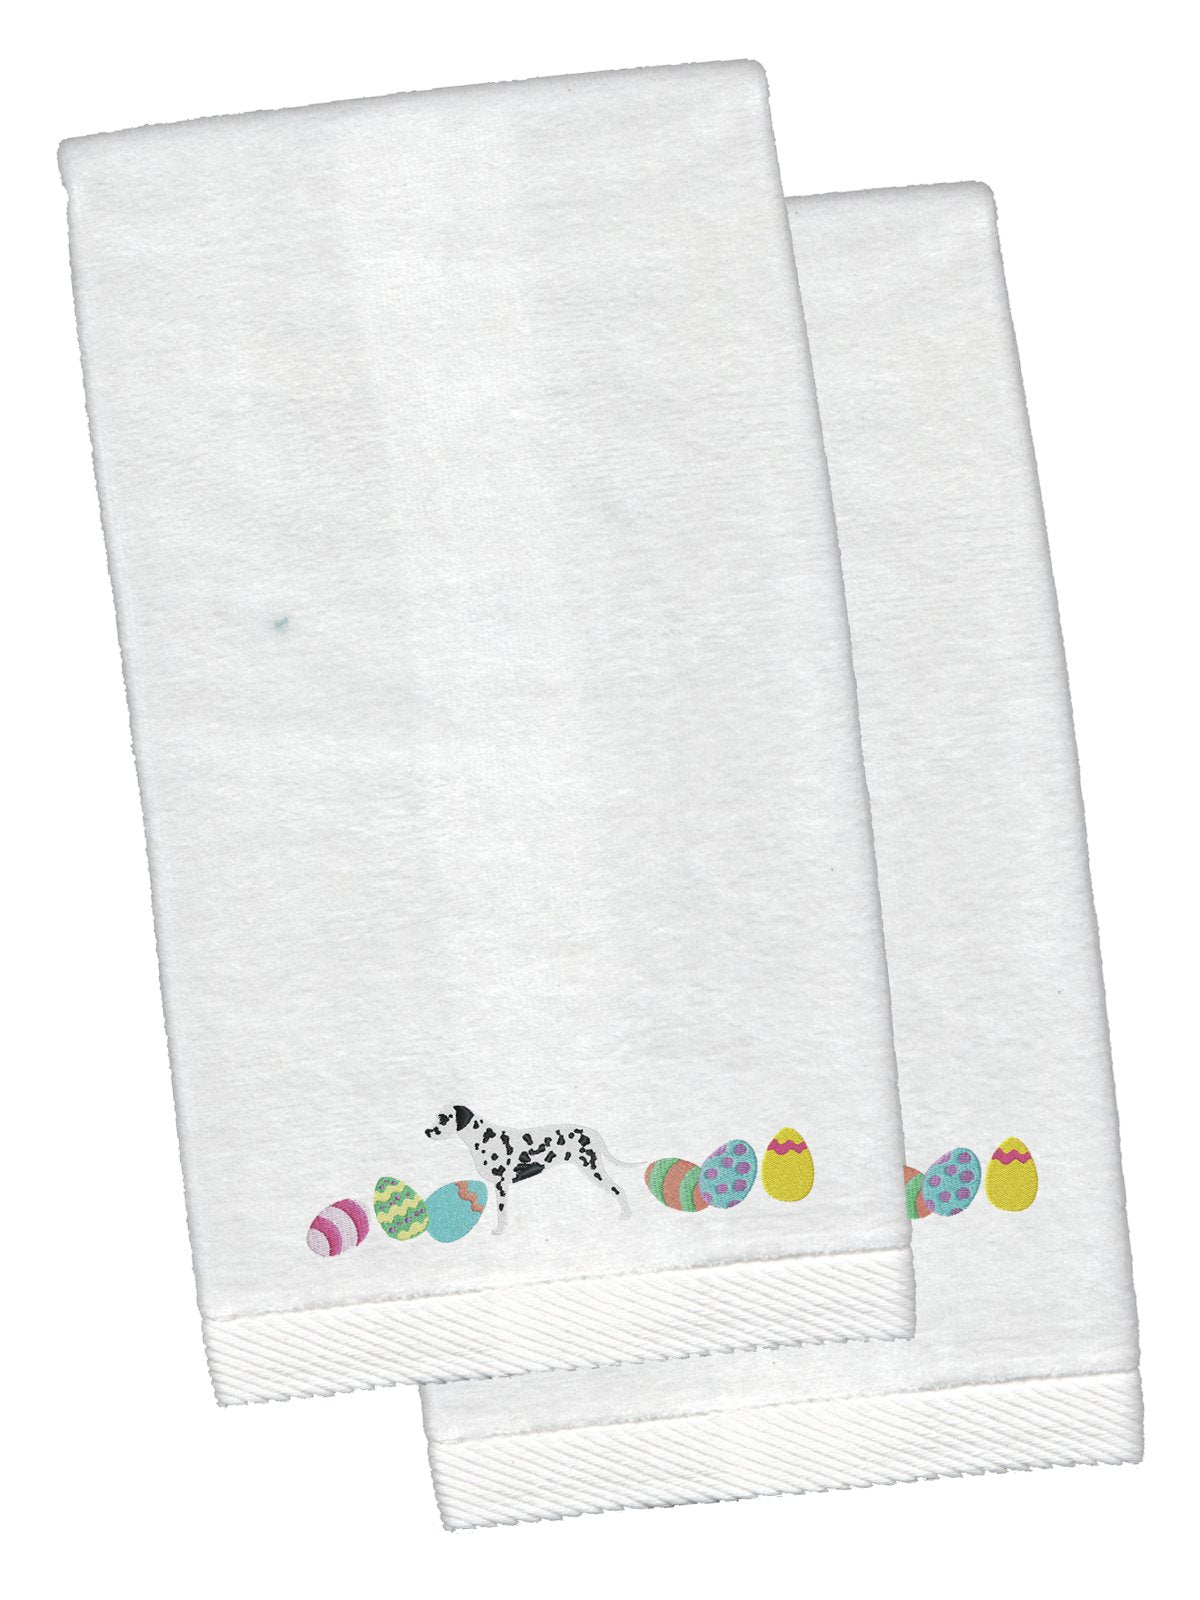 Dalmatian Easter White Embroidered Plush Hand Towel Set of 2 CK1632KTEMB by Caroline's Treasures